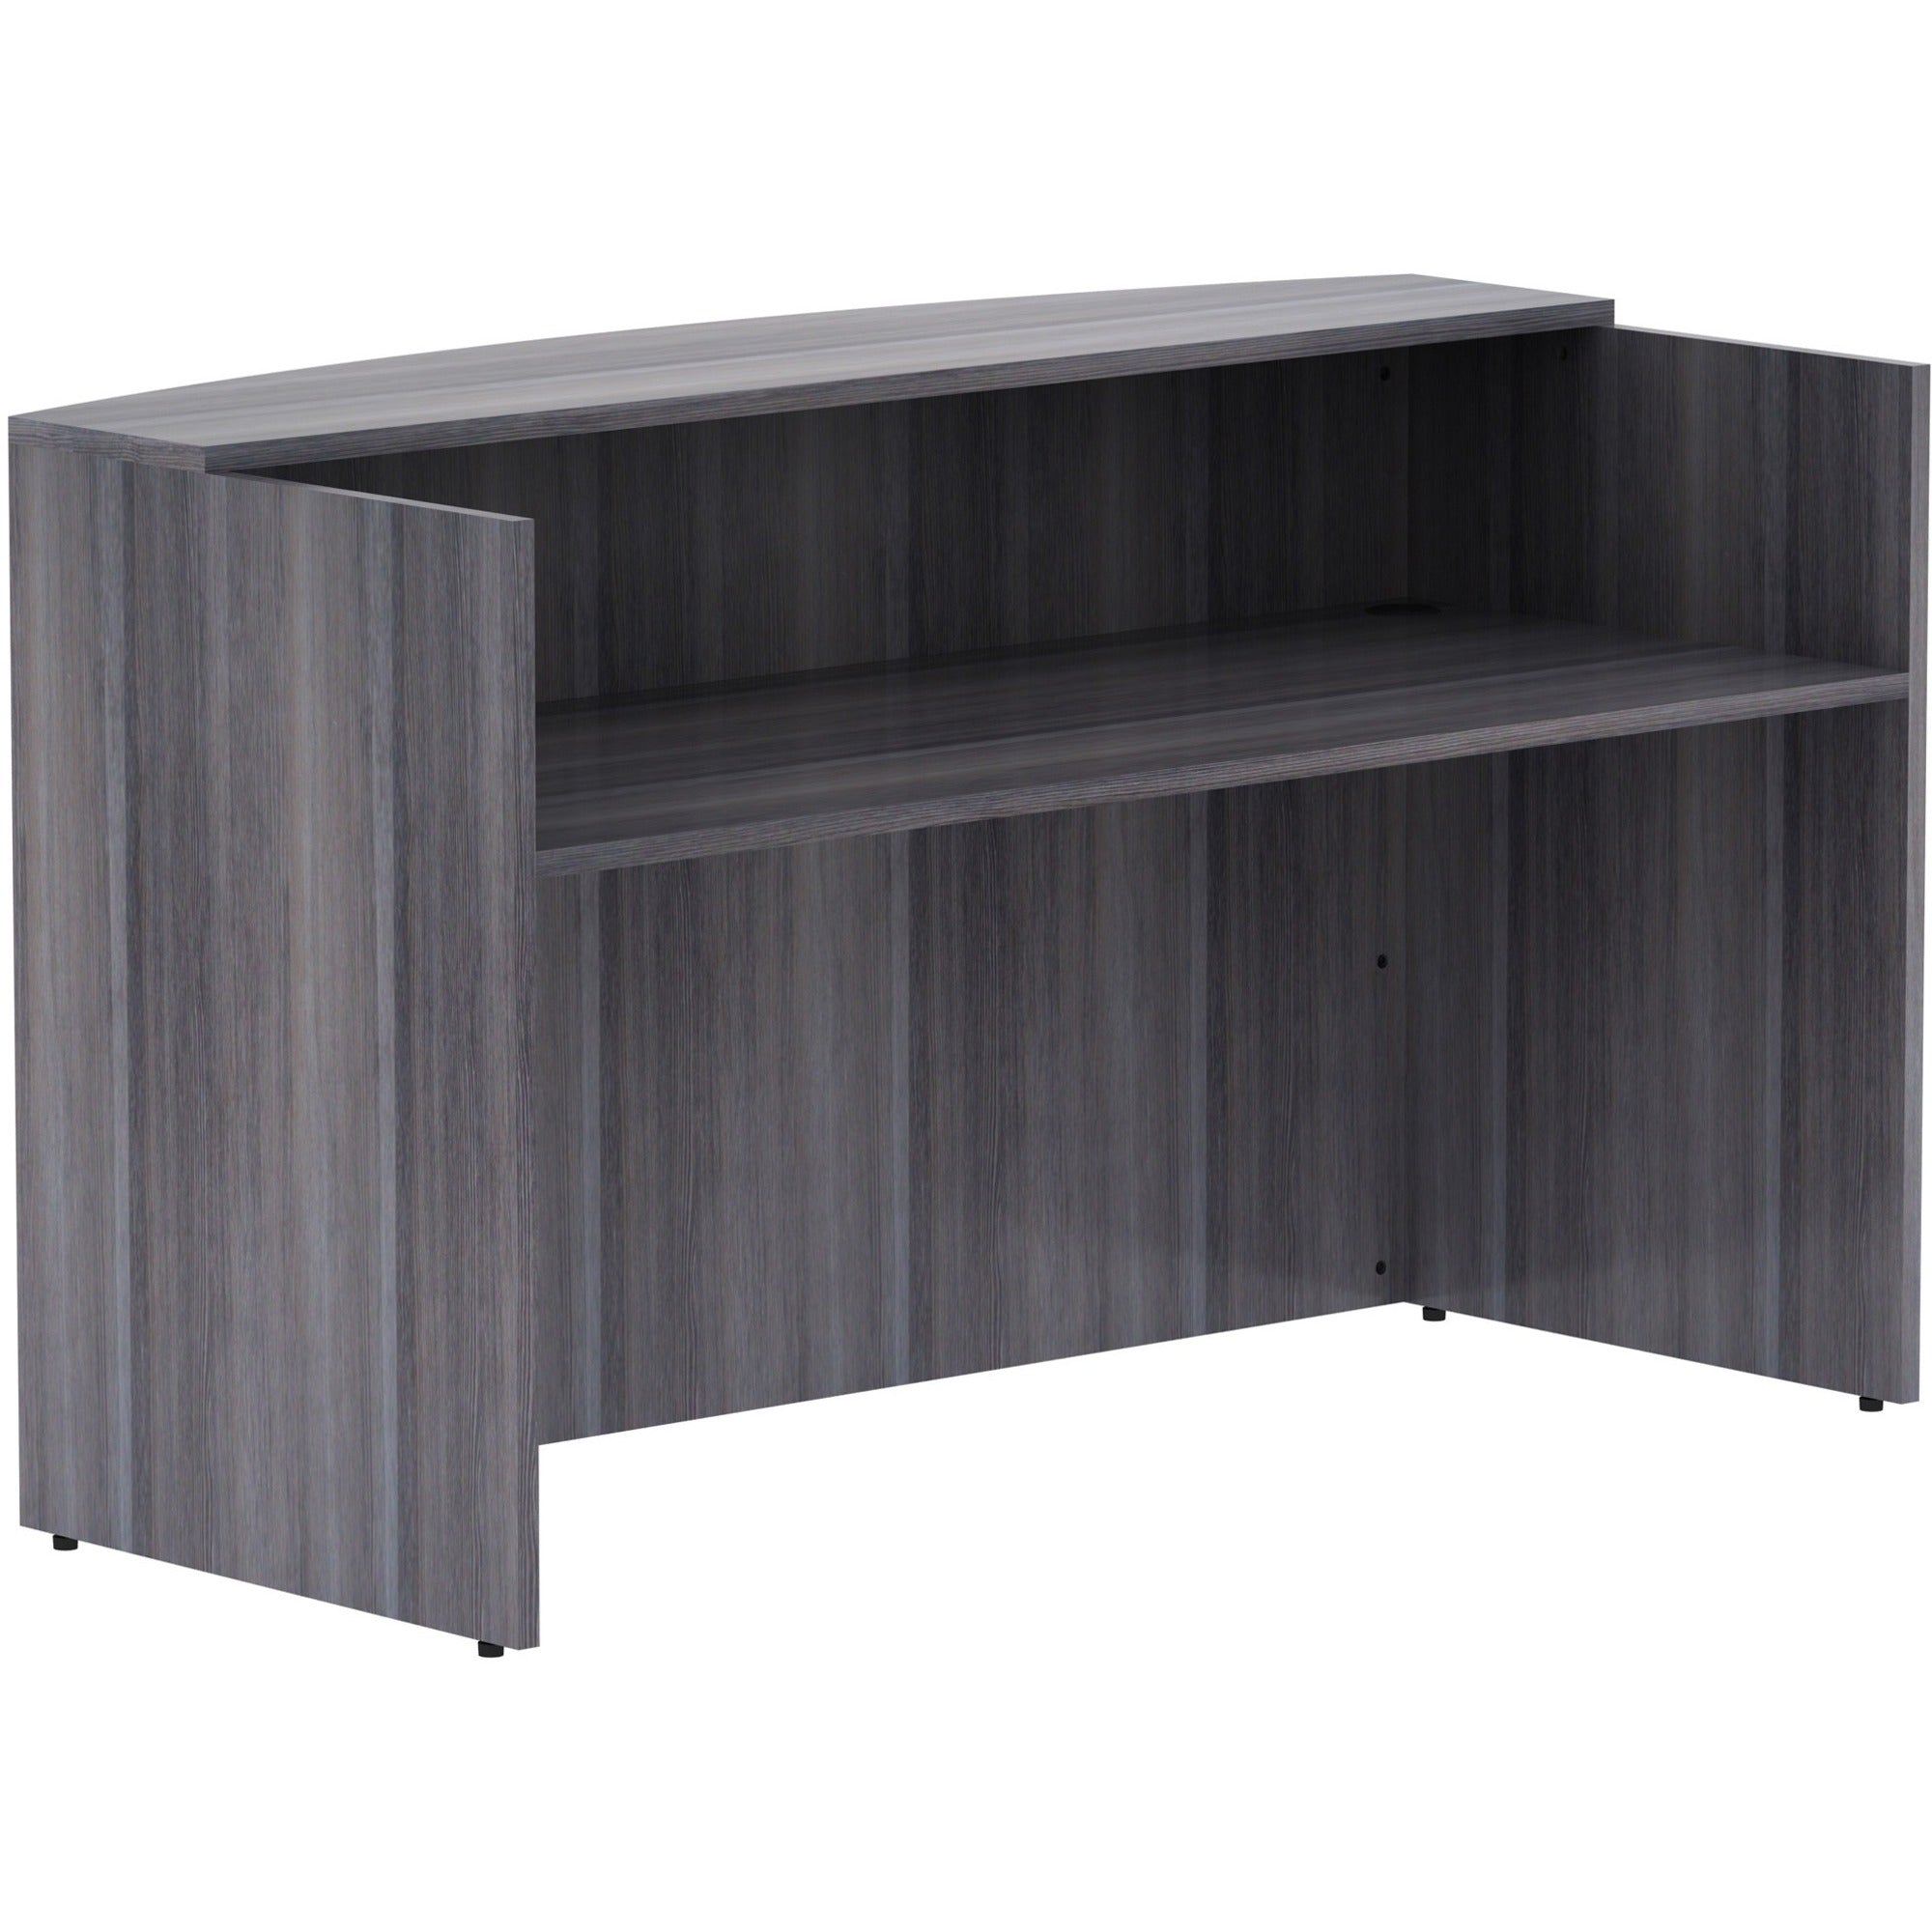 lorell-essentials-series-front-reception-desk-72-x-36425-desk-1-top-finish-weathered-charcoal-laminate_llr69595 - 1